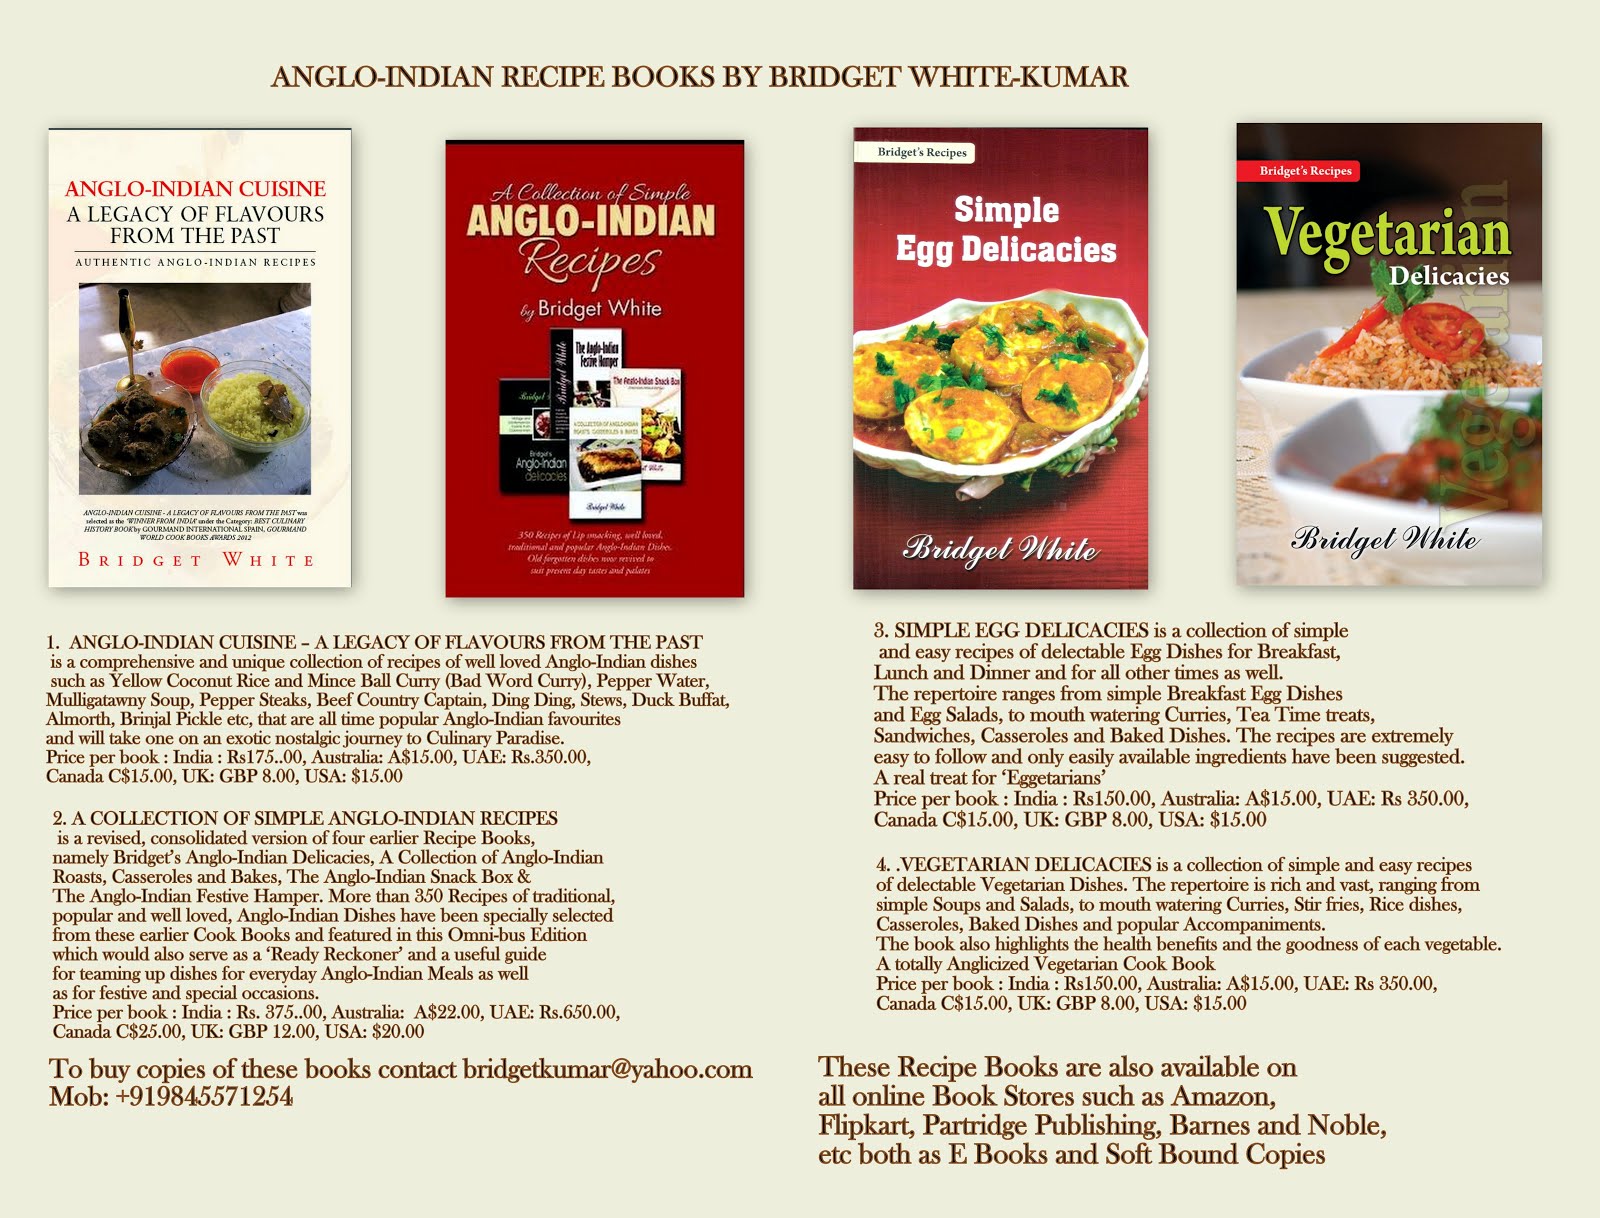 ANGLO-INDIAN CUISINE 